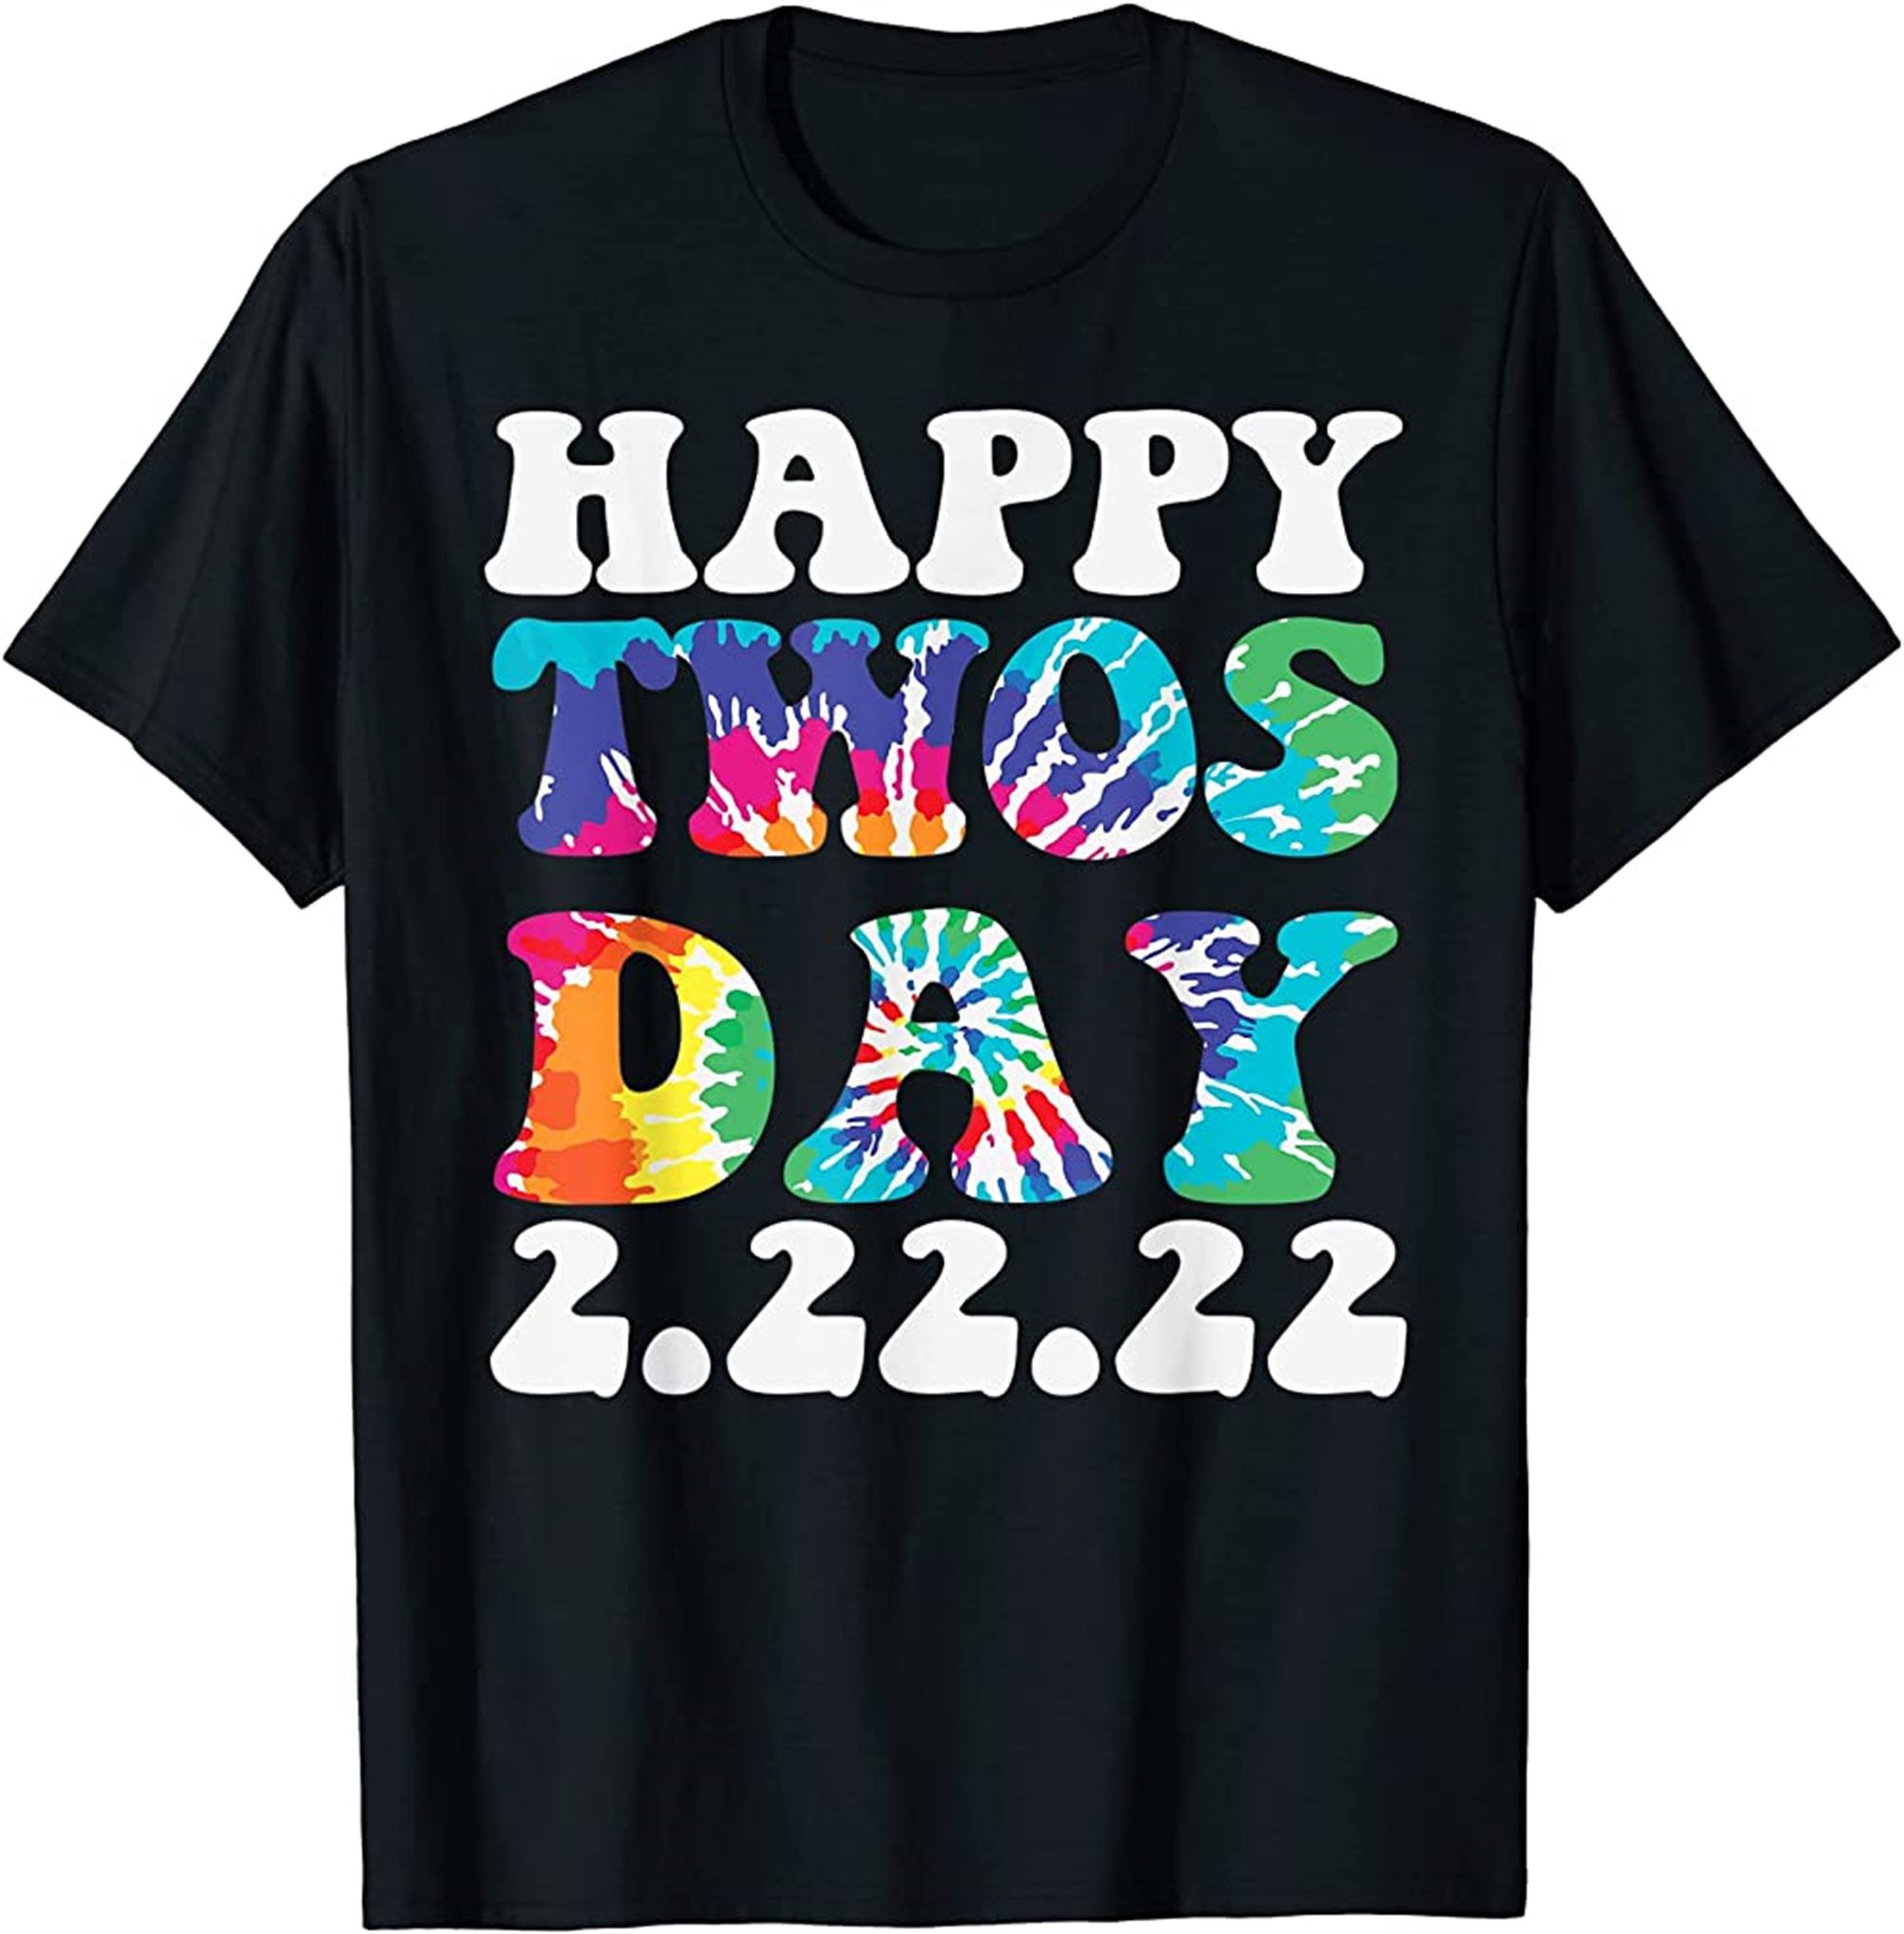 Twosday Hippie February 22nd 2022 22222 Retro Vintage 2222 T-shirt Full Size Up To 5xl